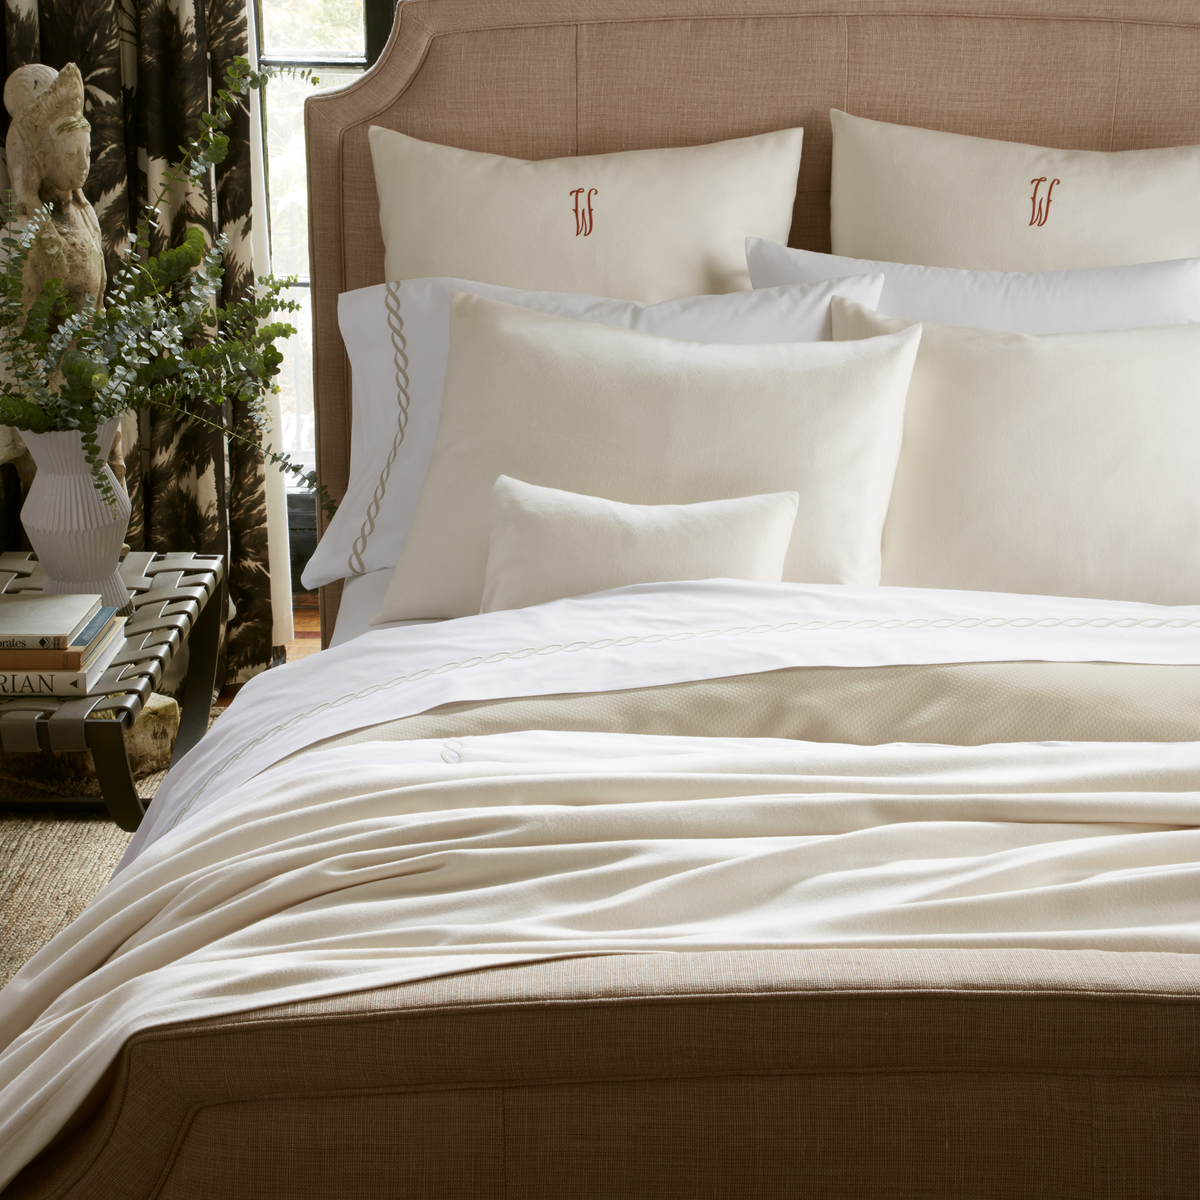 Corner Shot of Bed in Matouk Dream Modal Collection in Oyster Color